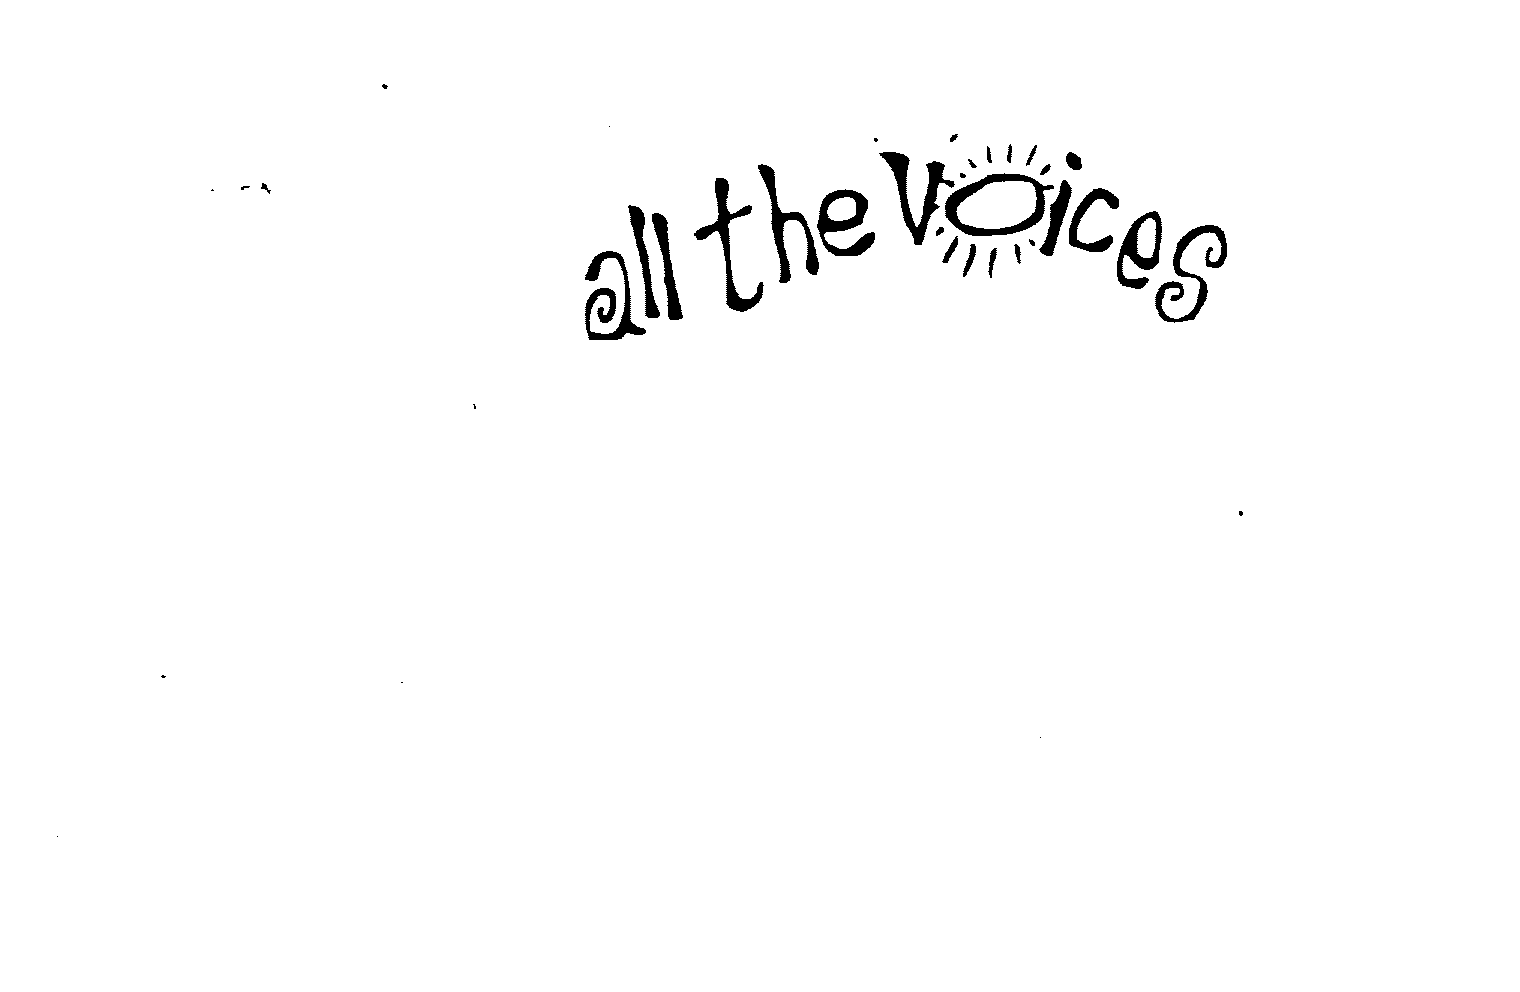  ALL THE VOICES